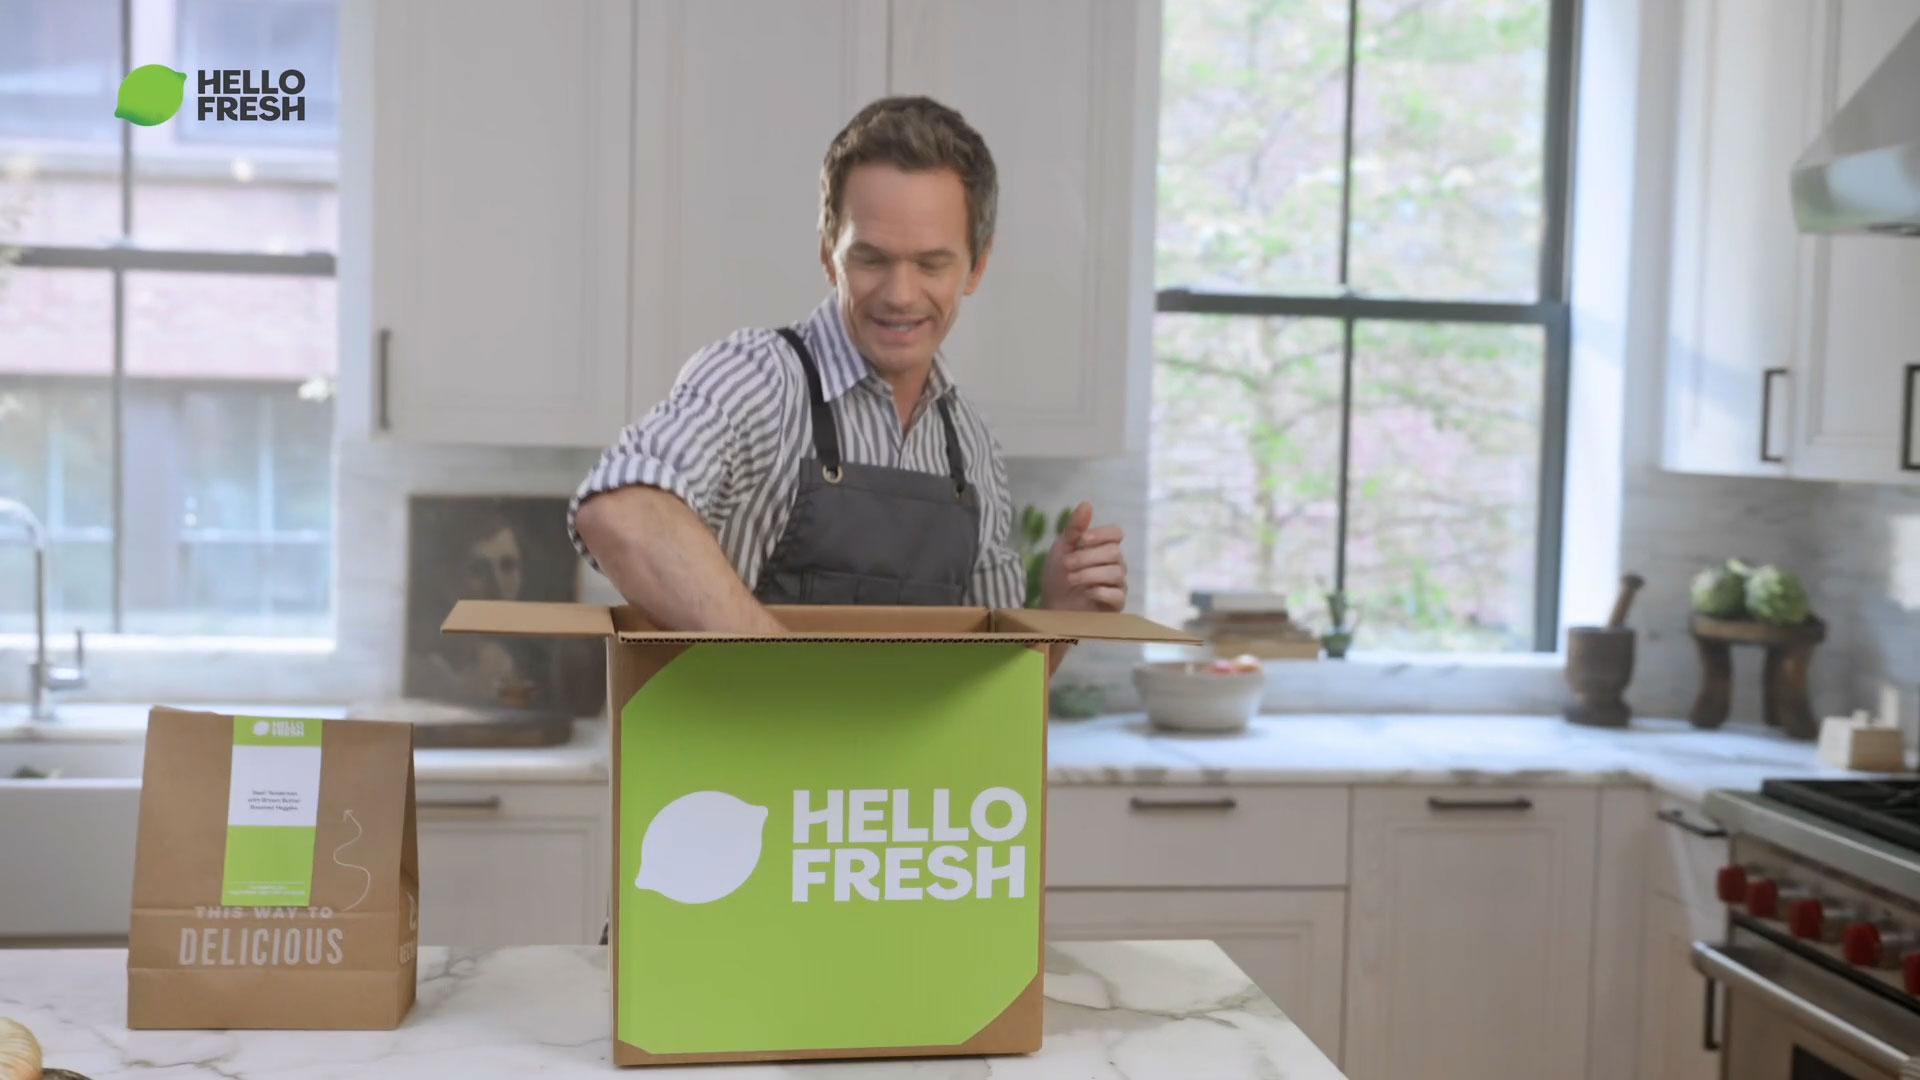 The Comedic, Vlog-Style Content Features Neil Patrick Harris, David Burtka and Their Kids as They Conquer Mealtime in Their Own Kitchen